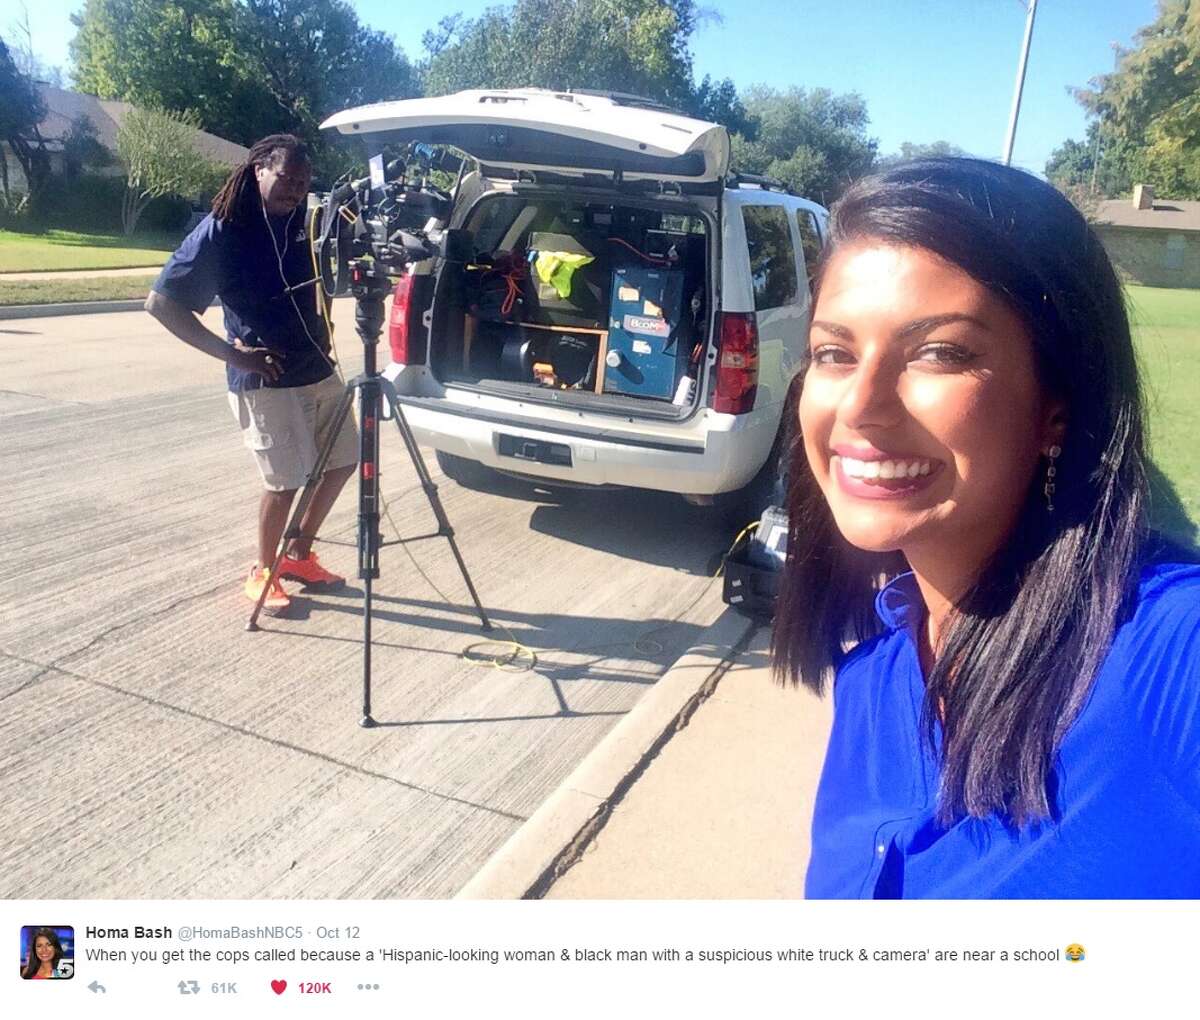 @HomaBashNBC5: "When you get the cops called because a 'Hispanic-looking woman & black man with a suspicious white truck & camera' are near a school"